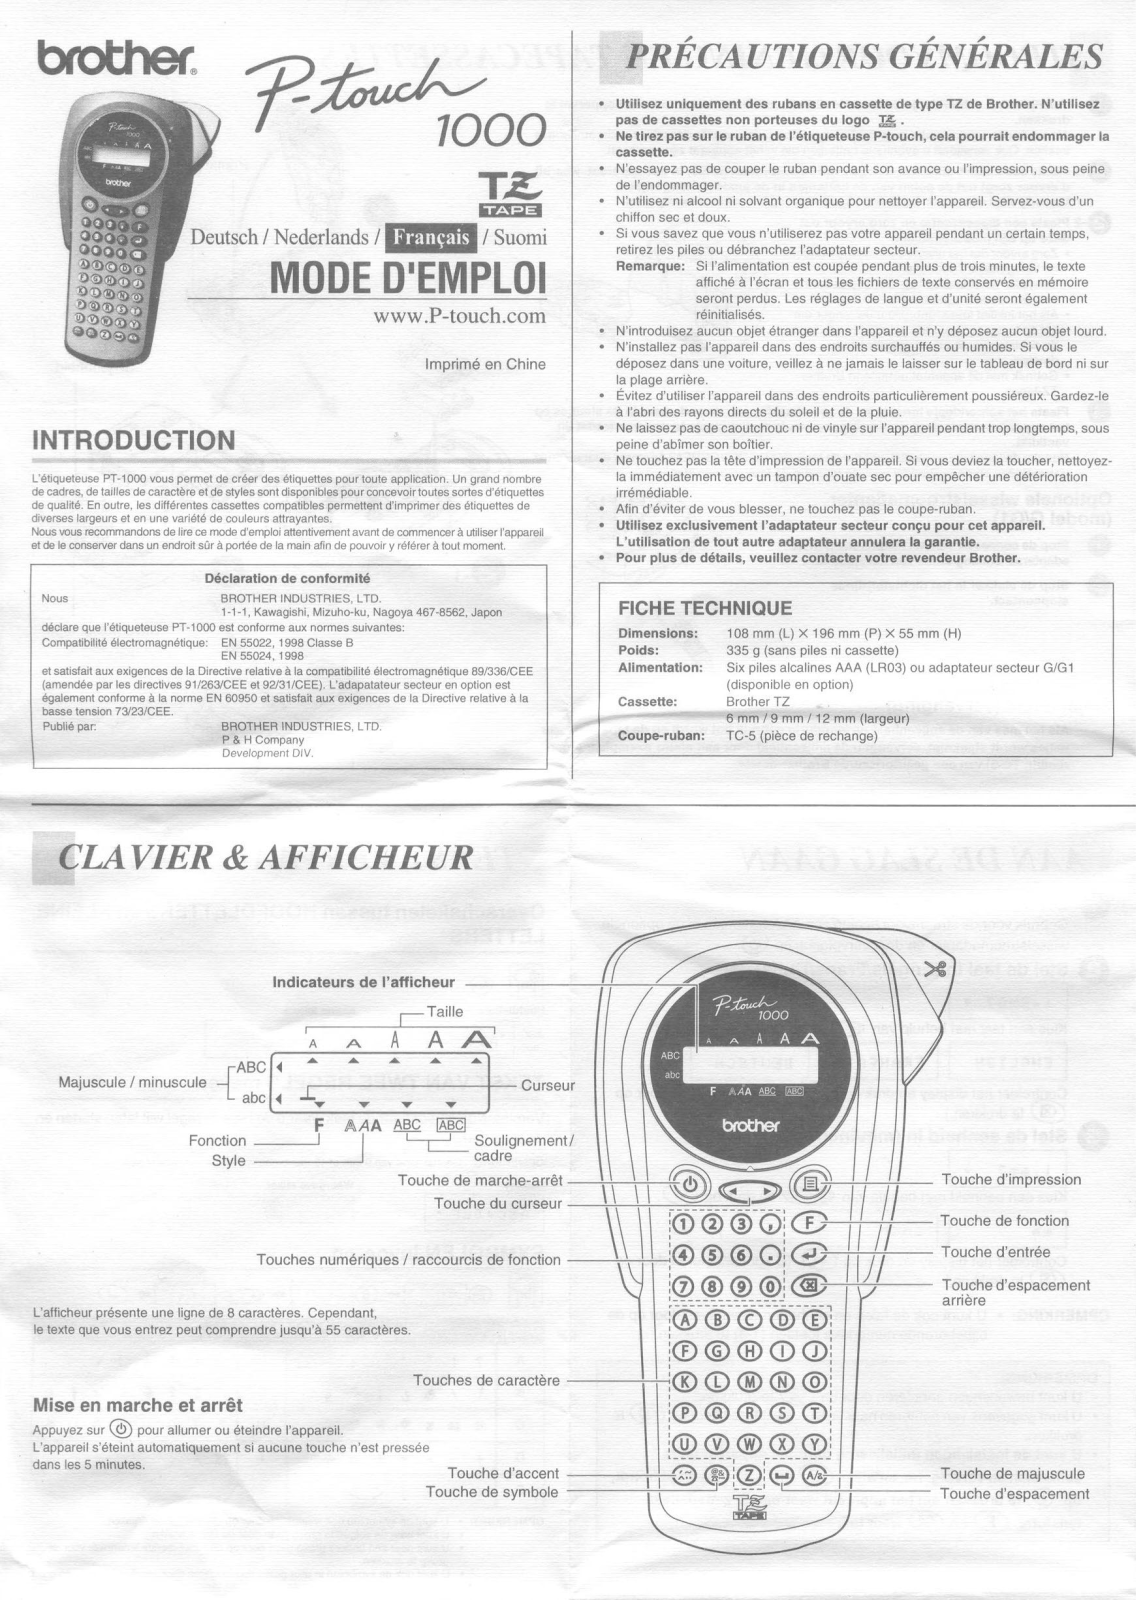 BROTHER P-TOUCH 1000 User Manual